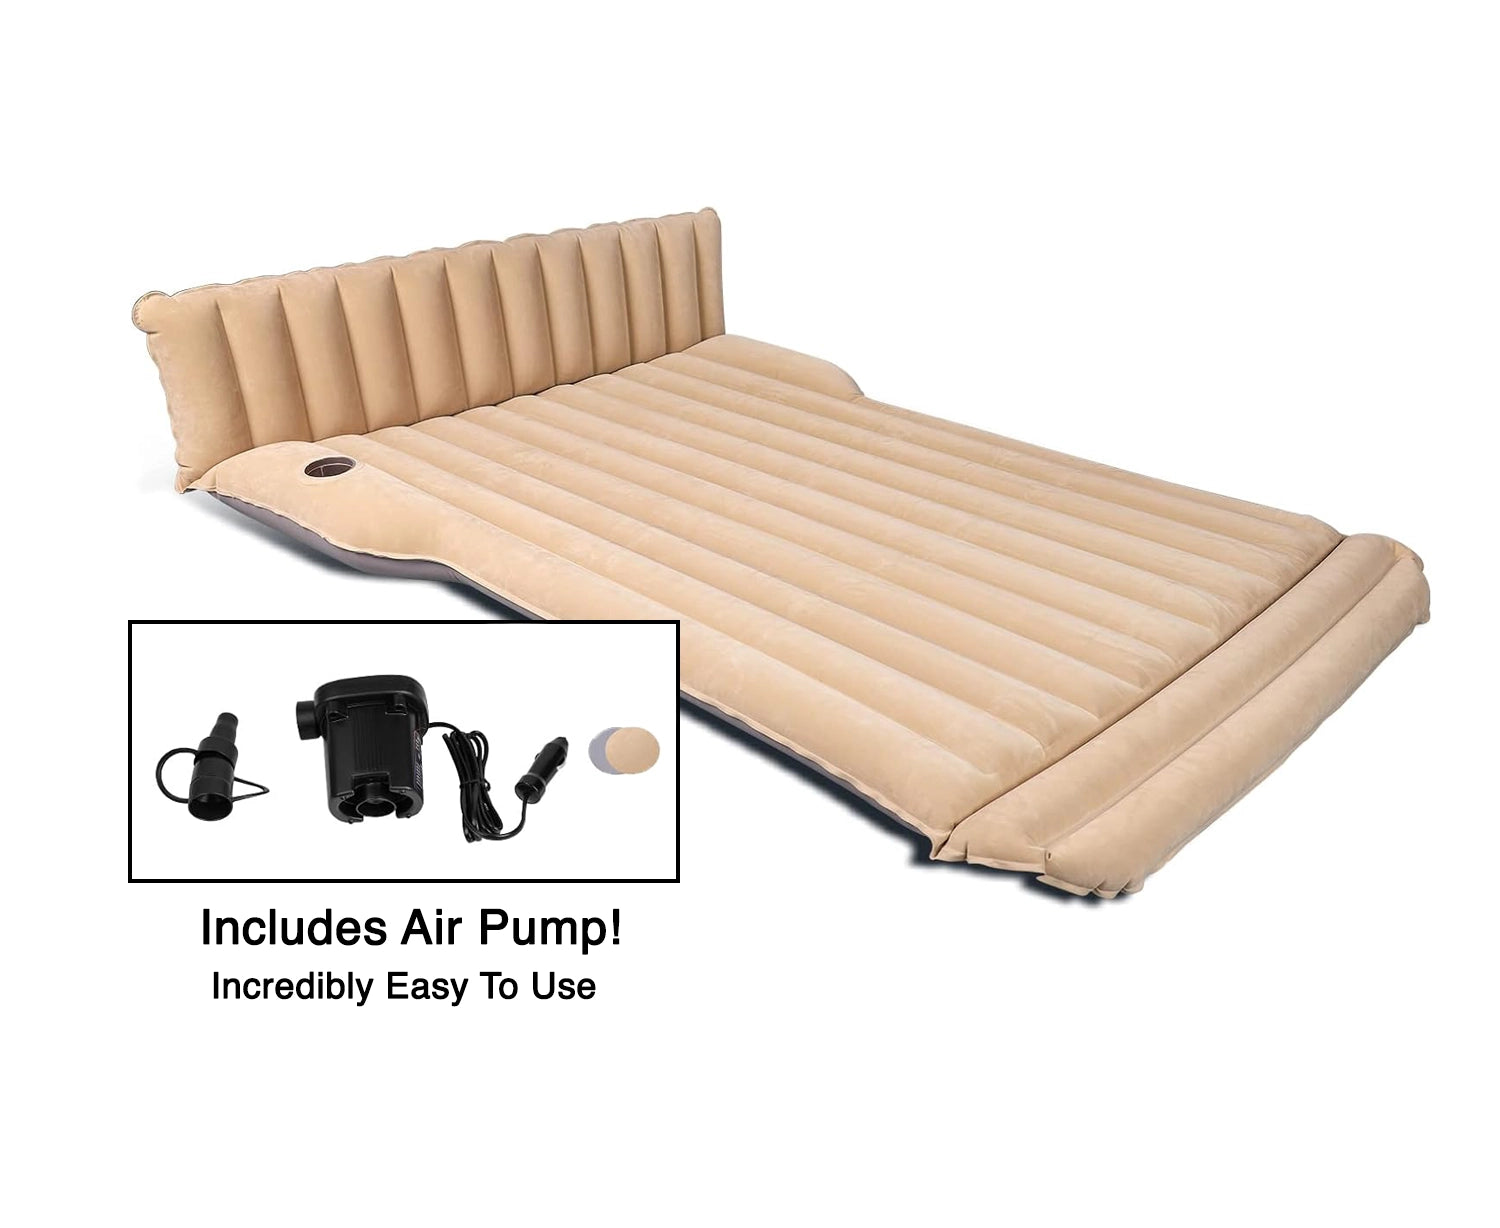 Adreama Tesla Model 3/Y Self-Inflating Air Mattress (Ships Within 5-7 Days)